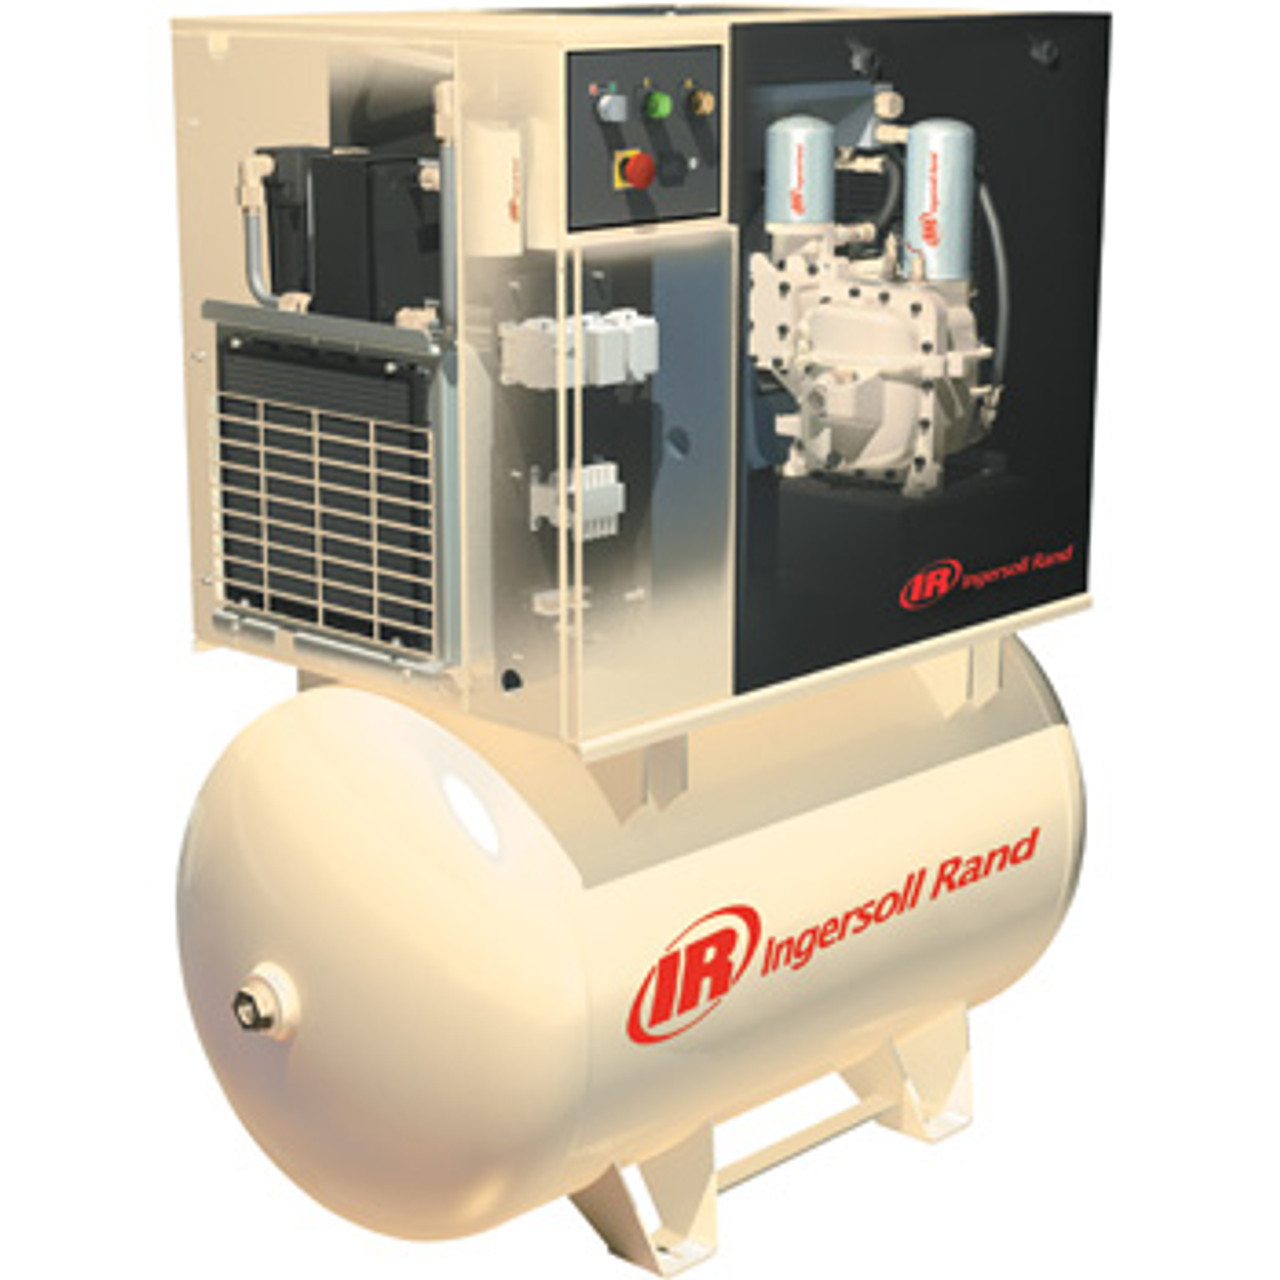 Ingersoll Rand Rotary Screw Air Compressors -Total Air System w